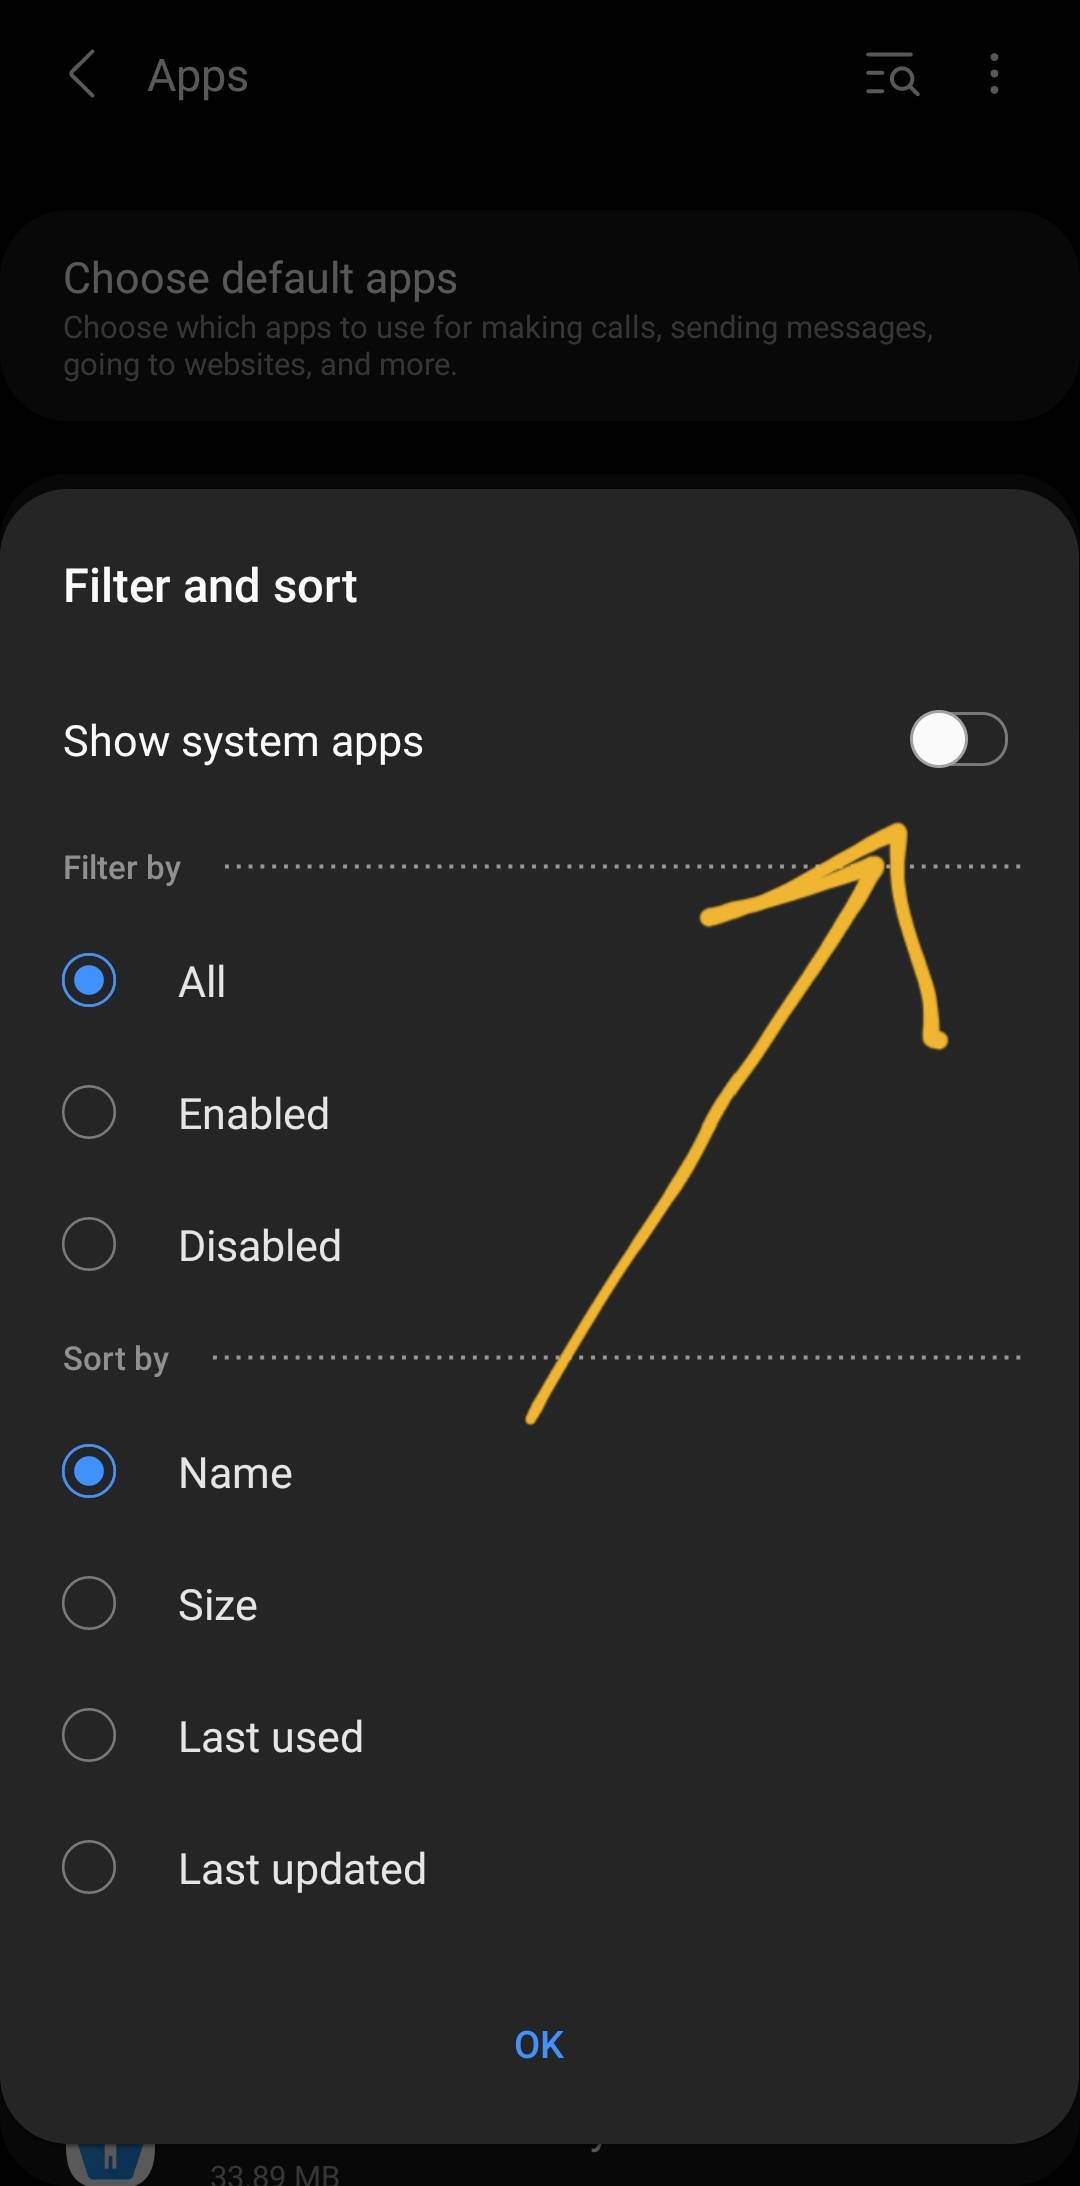 The Connected USB Device is not Supported-Samsung ... - Samsung Members